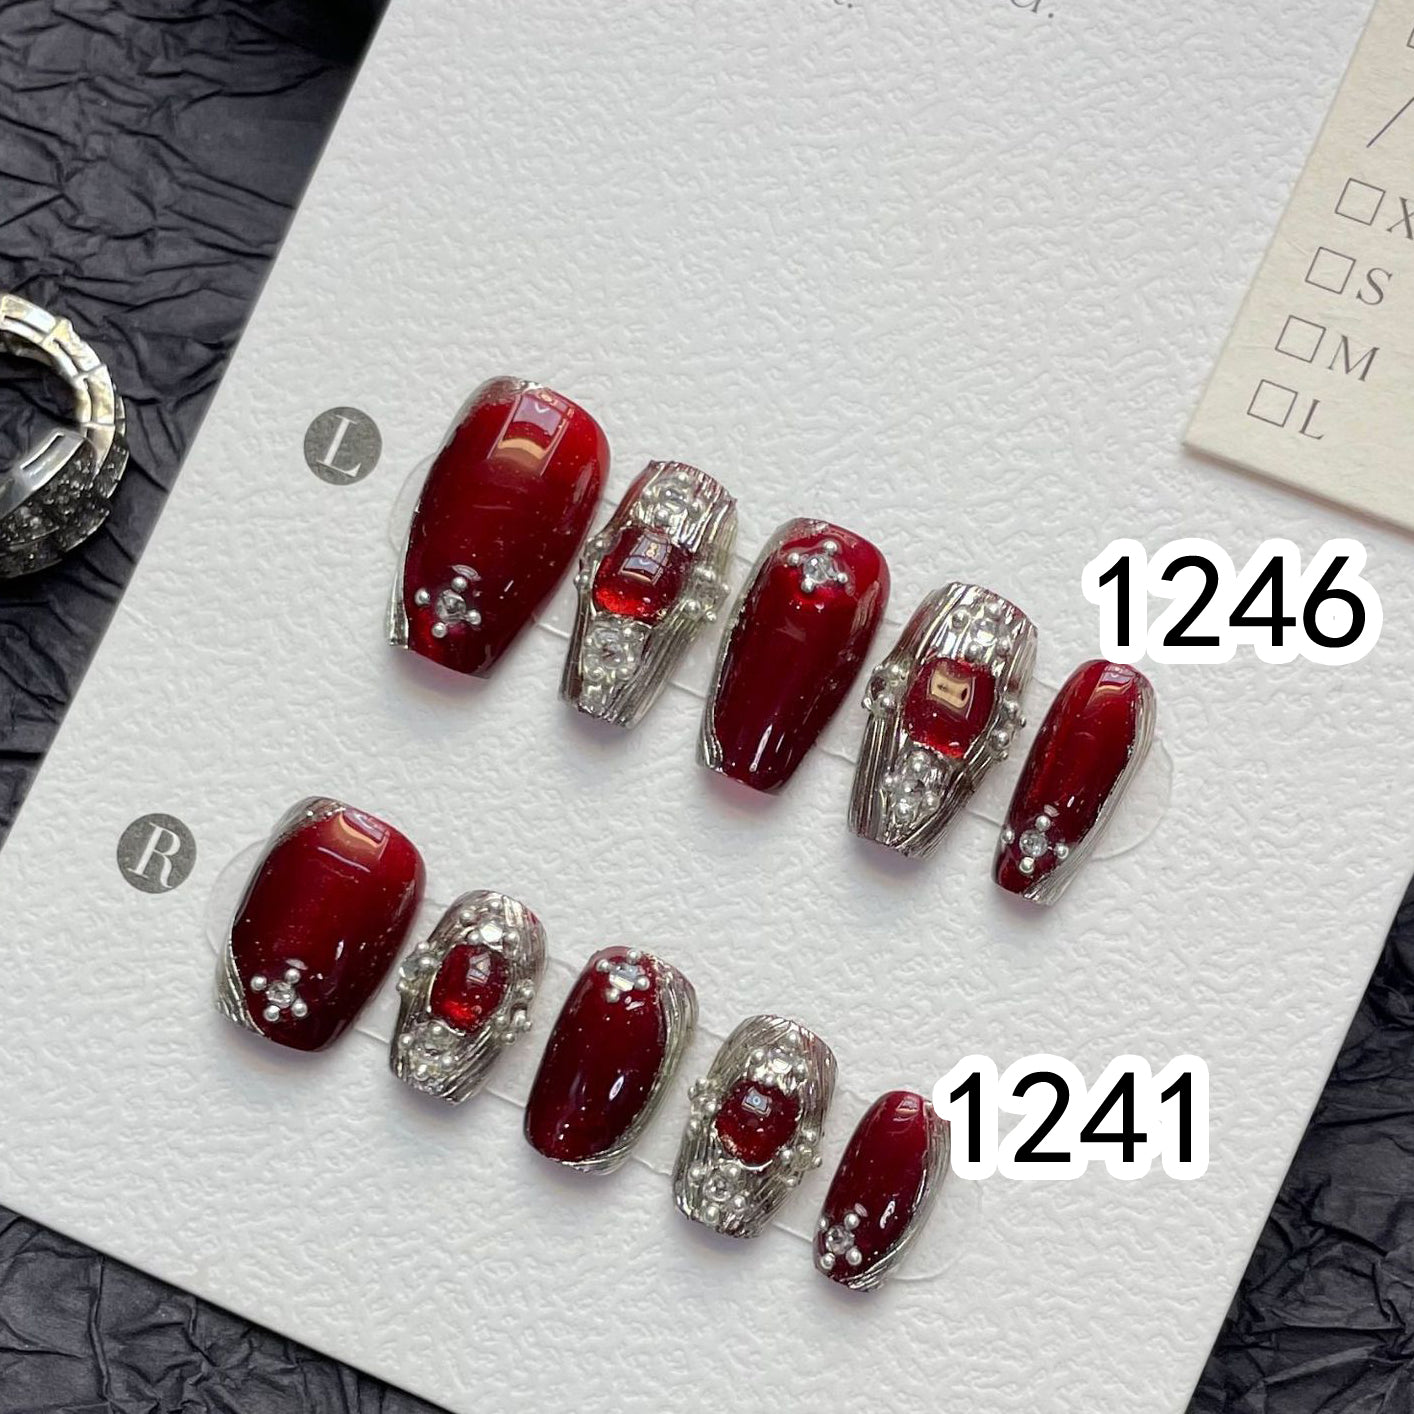 1241/1246 Red BUCCELLATI style press on nails 100% handmade false nails red sliver